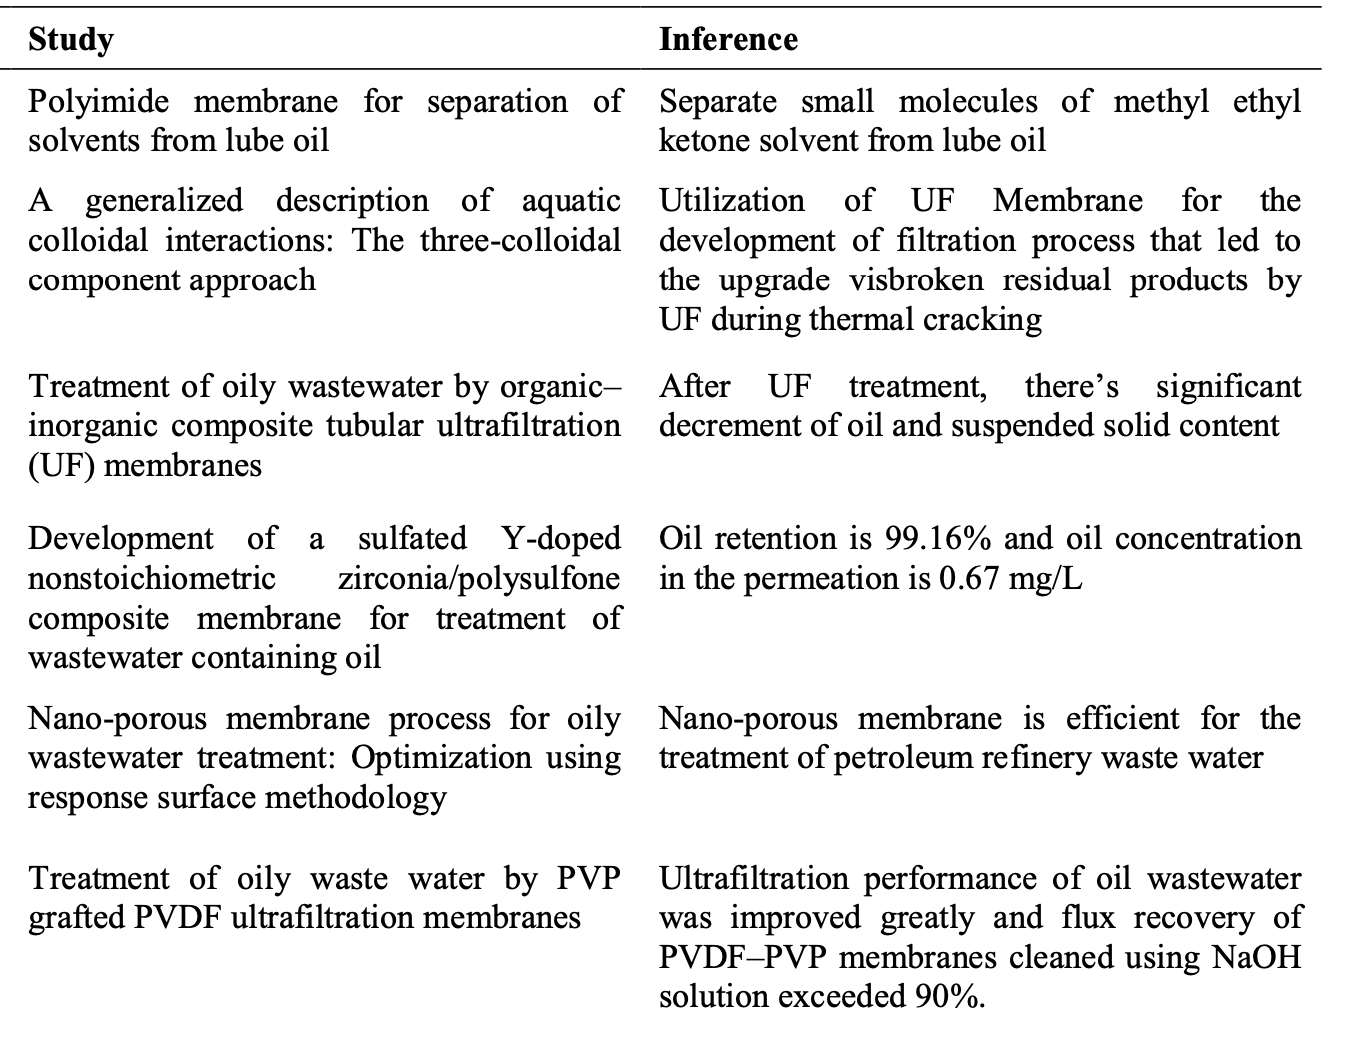  Advancement in membrane utilizations for produced water purification 